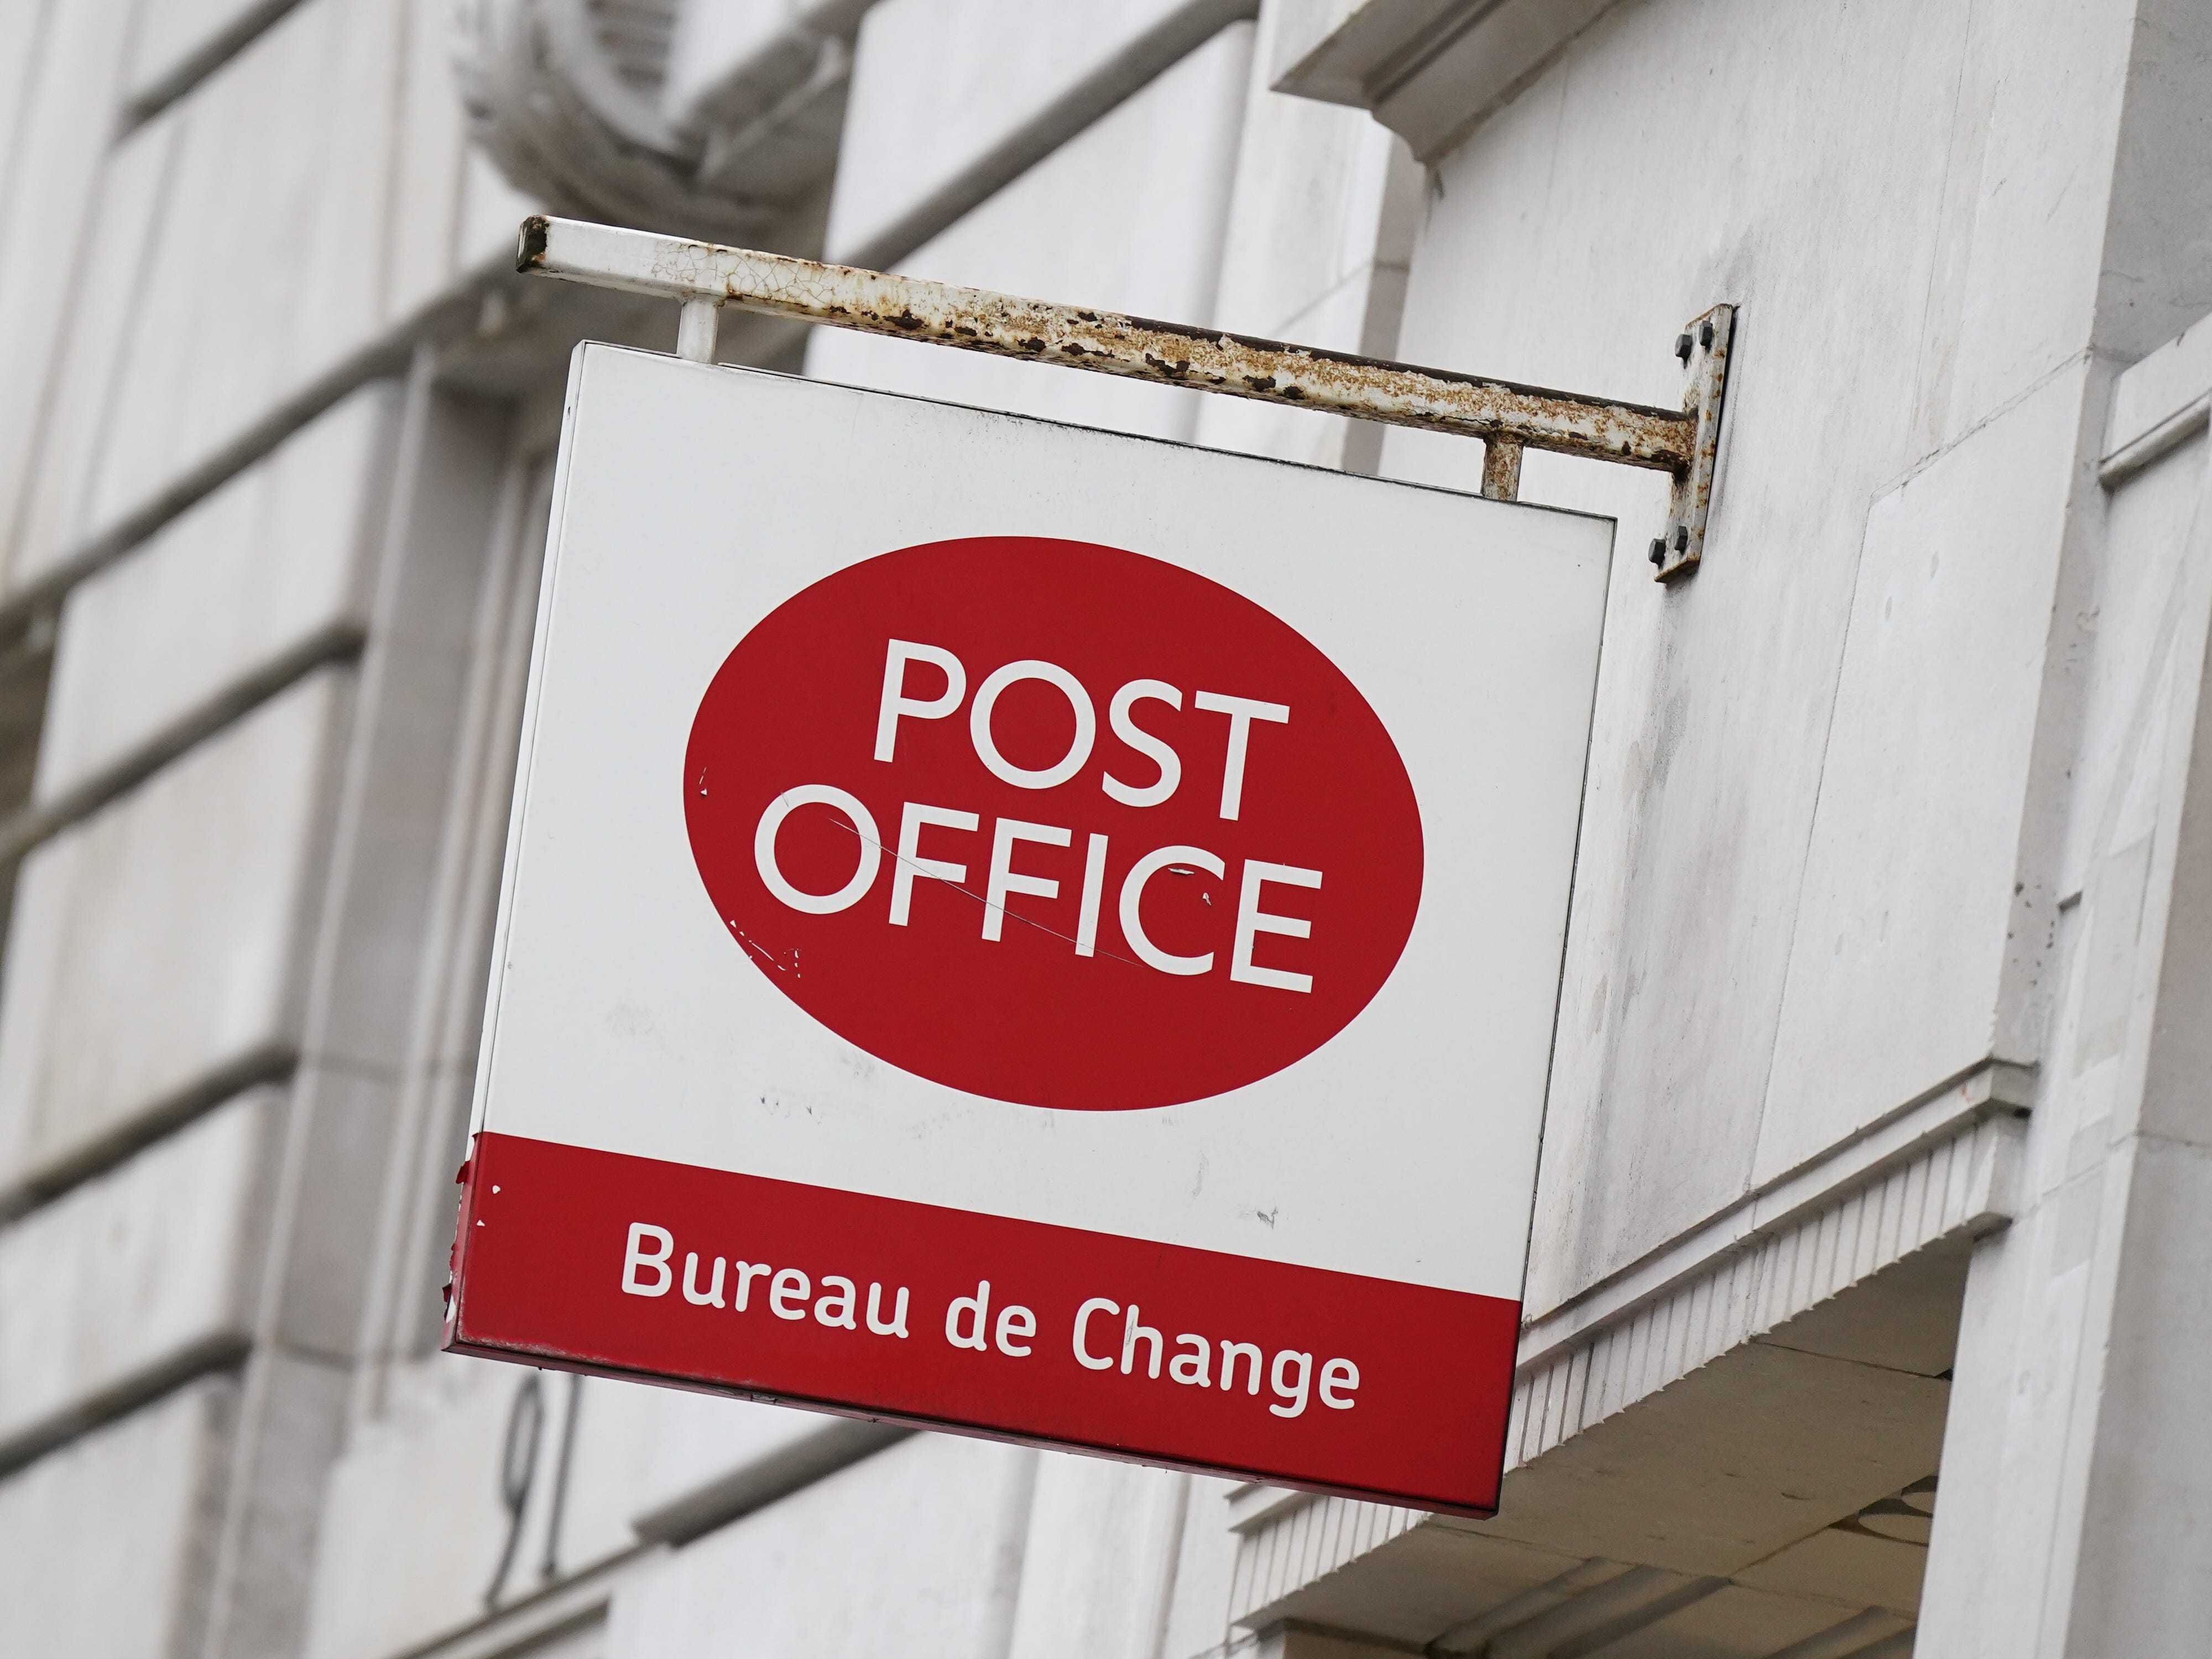 Ex-Post Office chairman Henry Staunton to be questioned by MPs